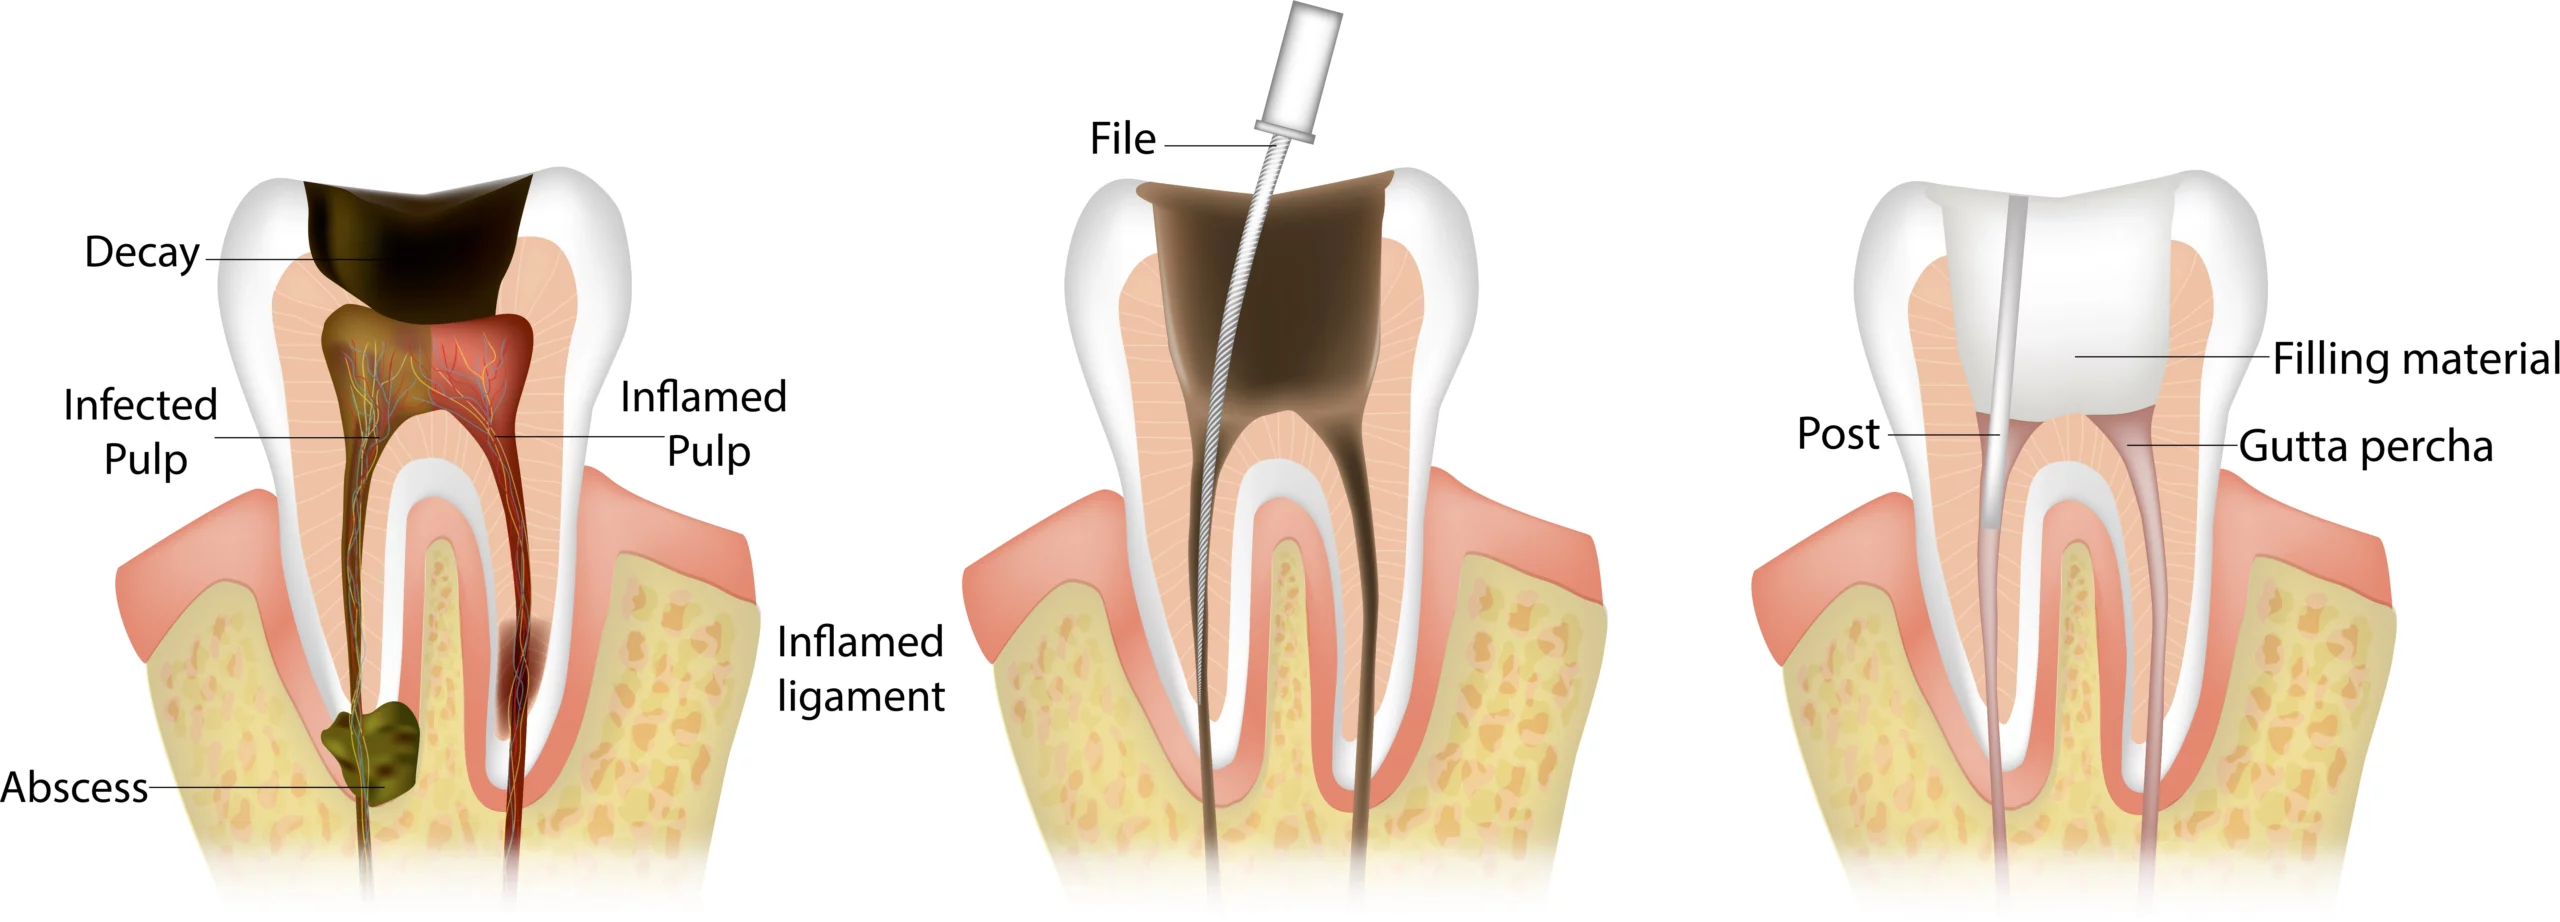 Root Canal Treatment in Summerville SC